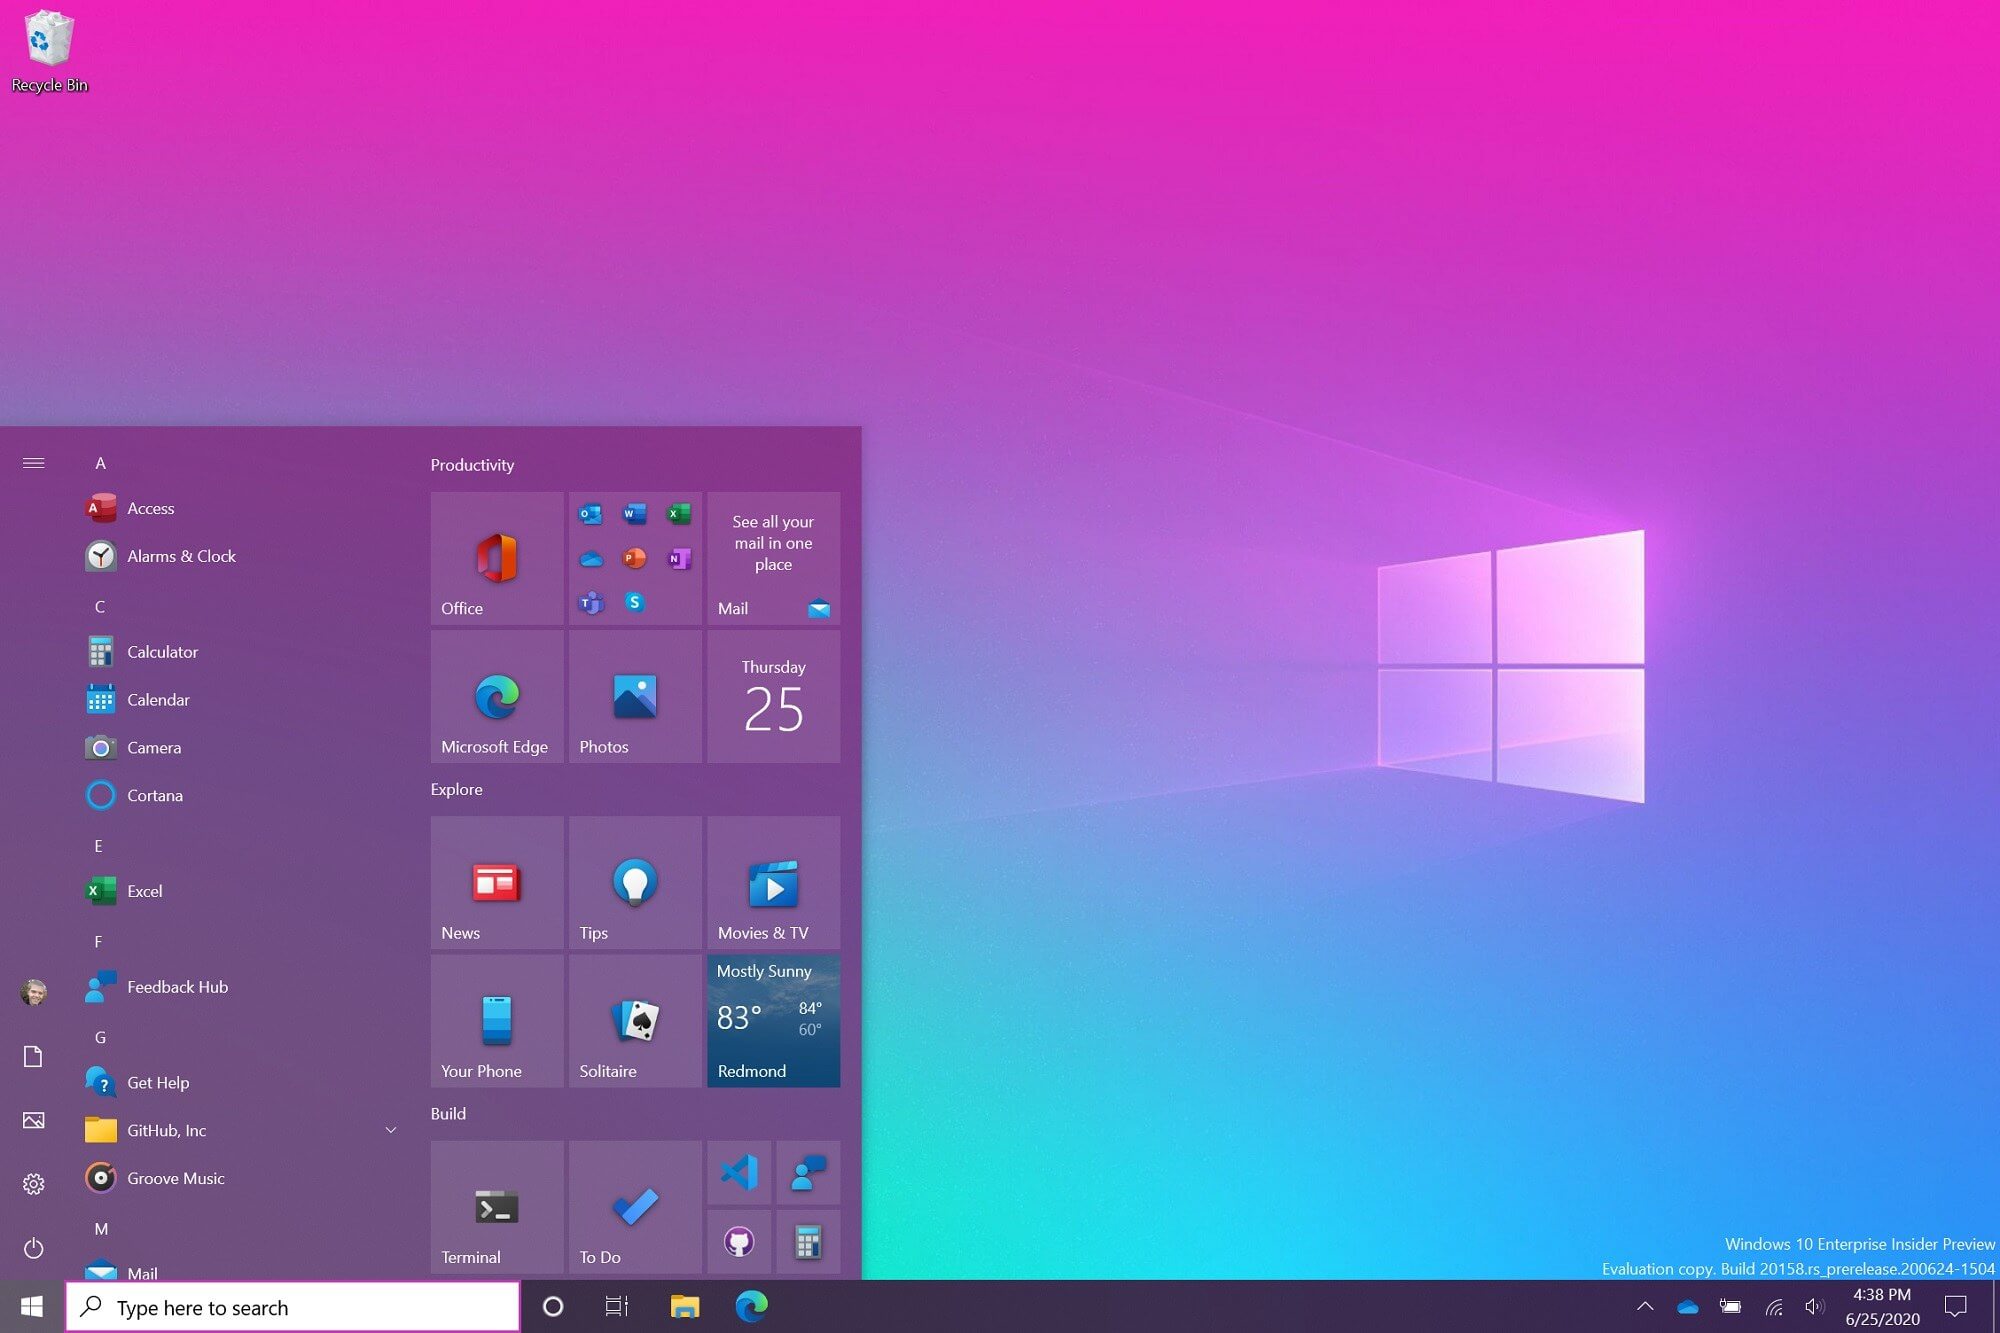 Check out all the features in Windows 10's Insider Preview Build 20161, including the new Start Menu